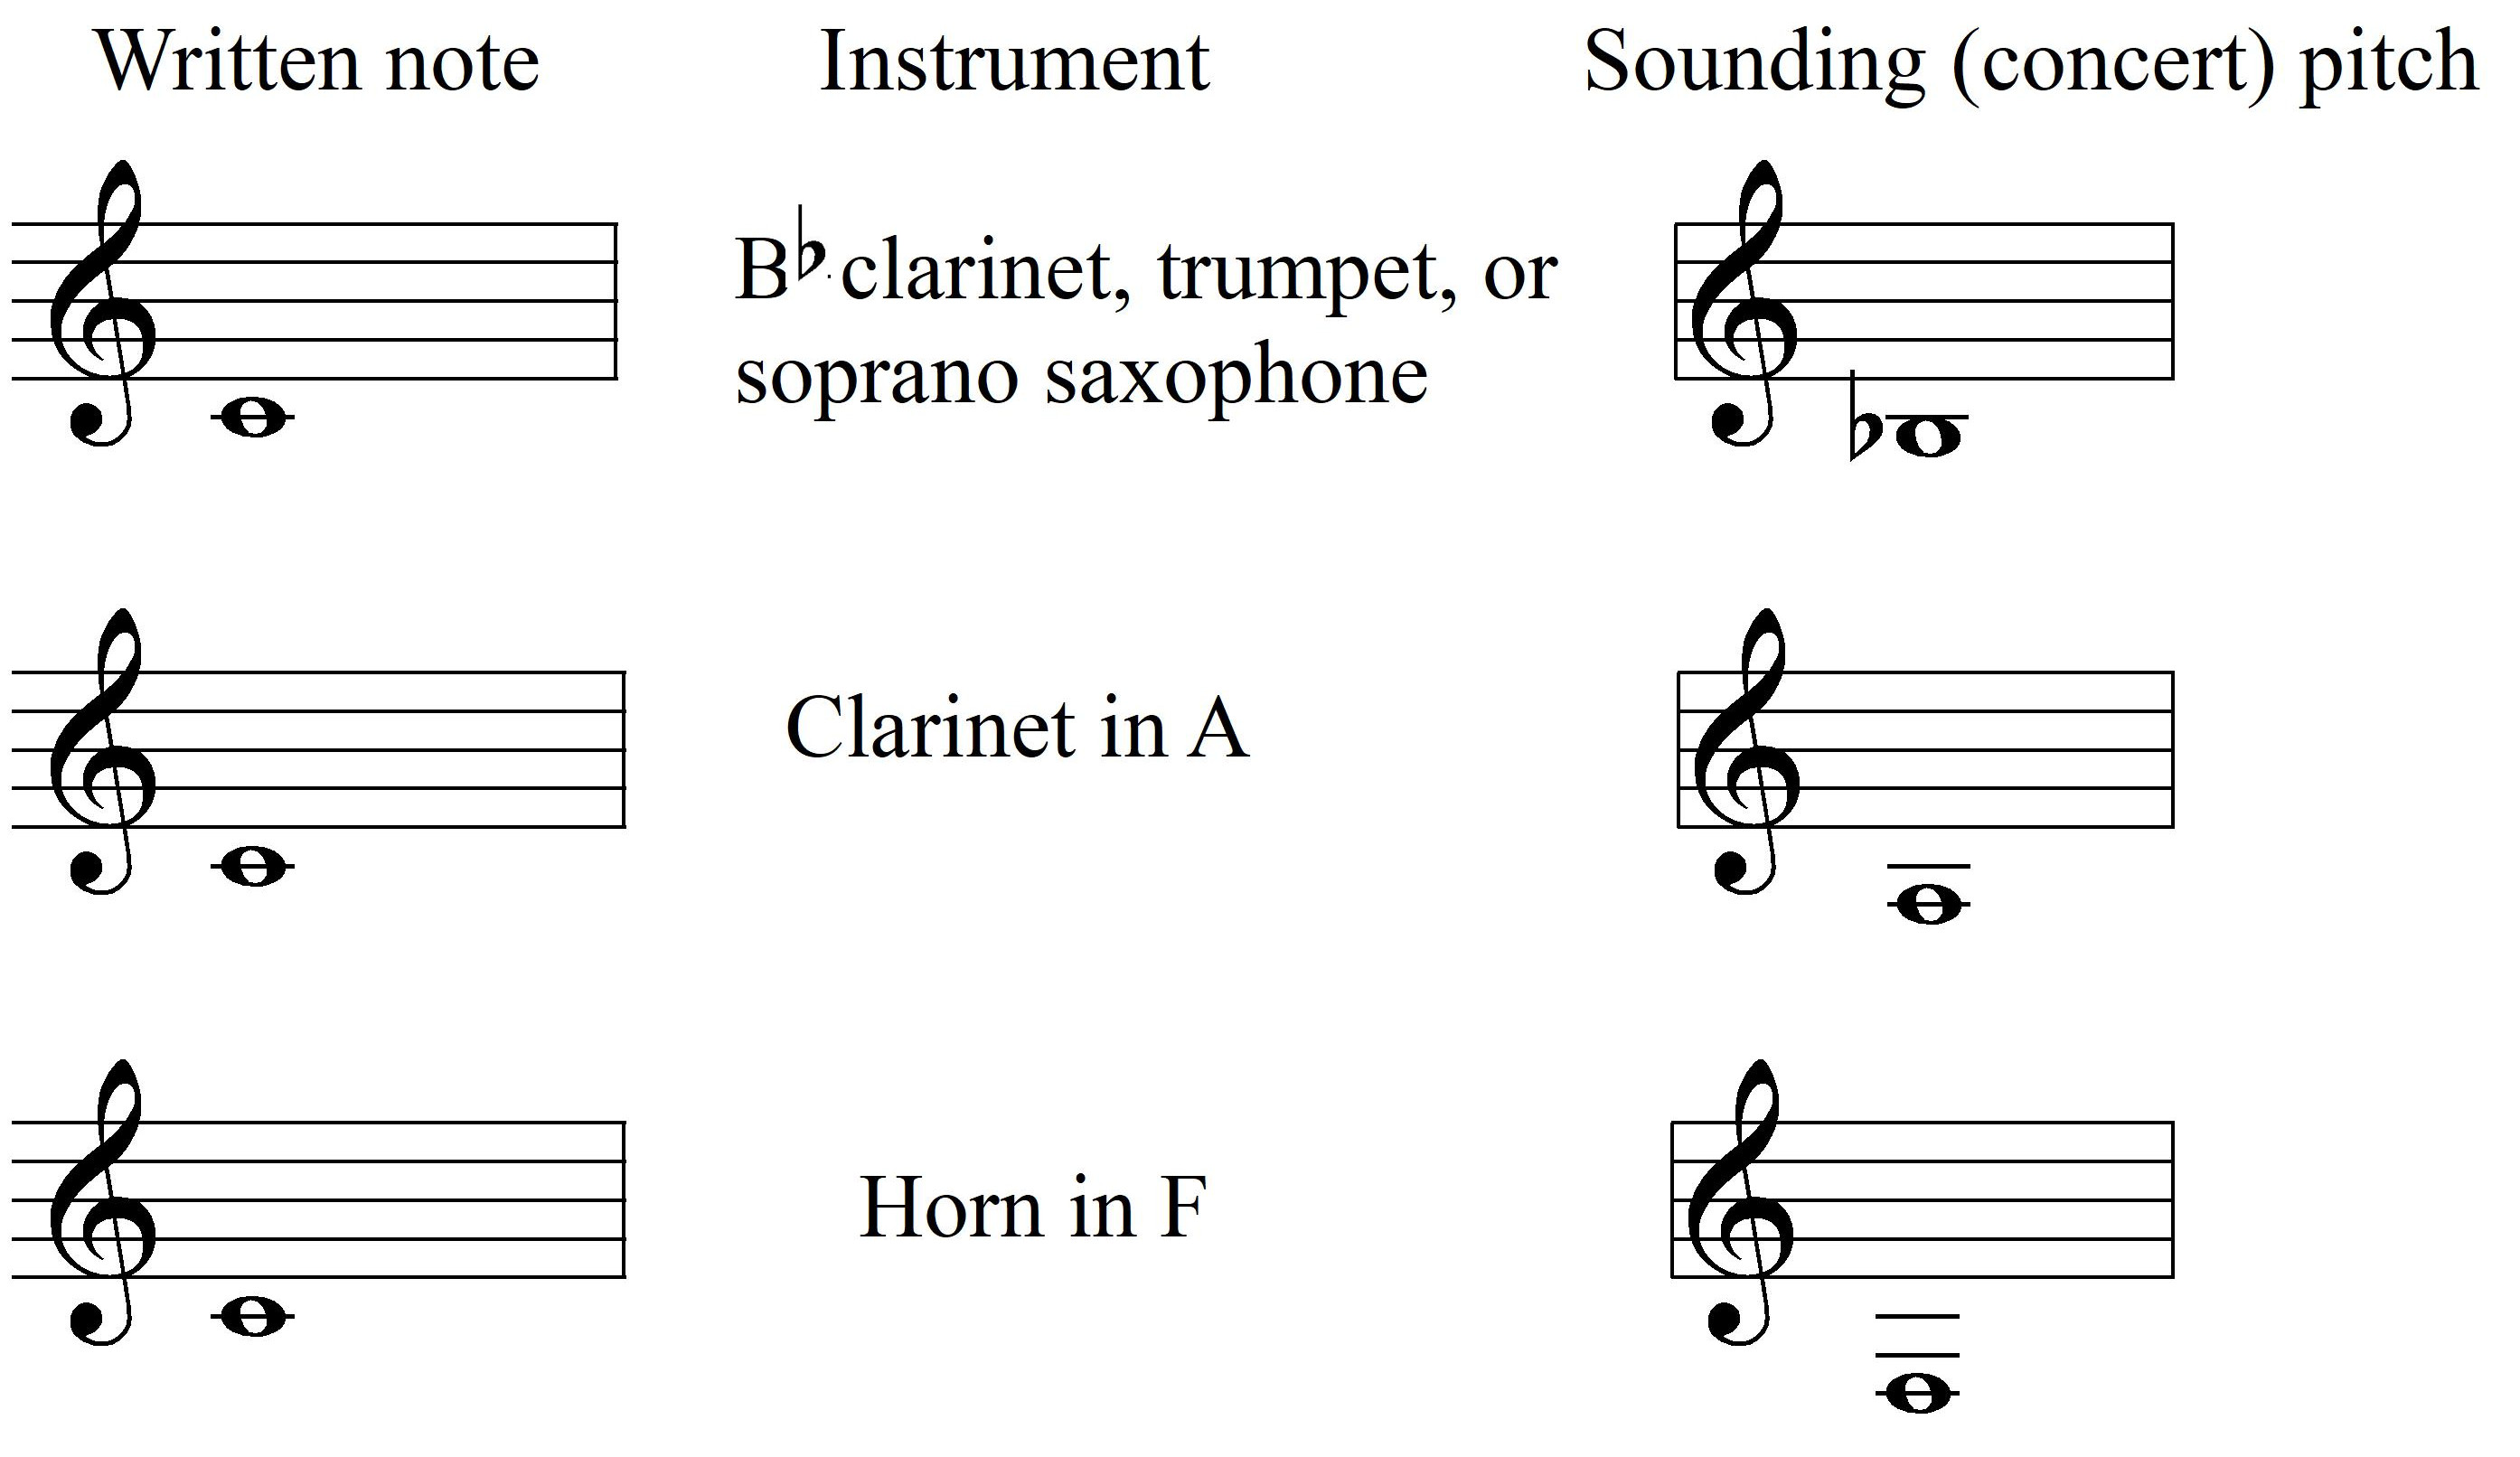 What Brass Instruments Are Playing The Theme In This Excerpt?